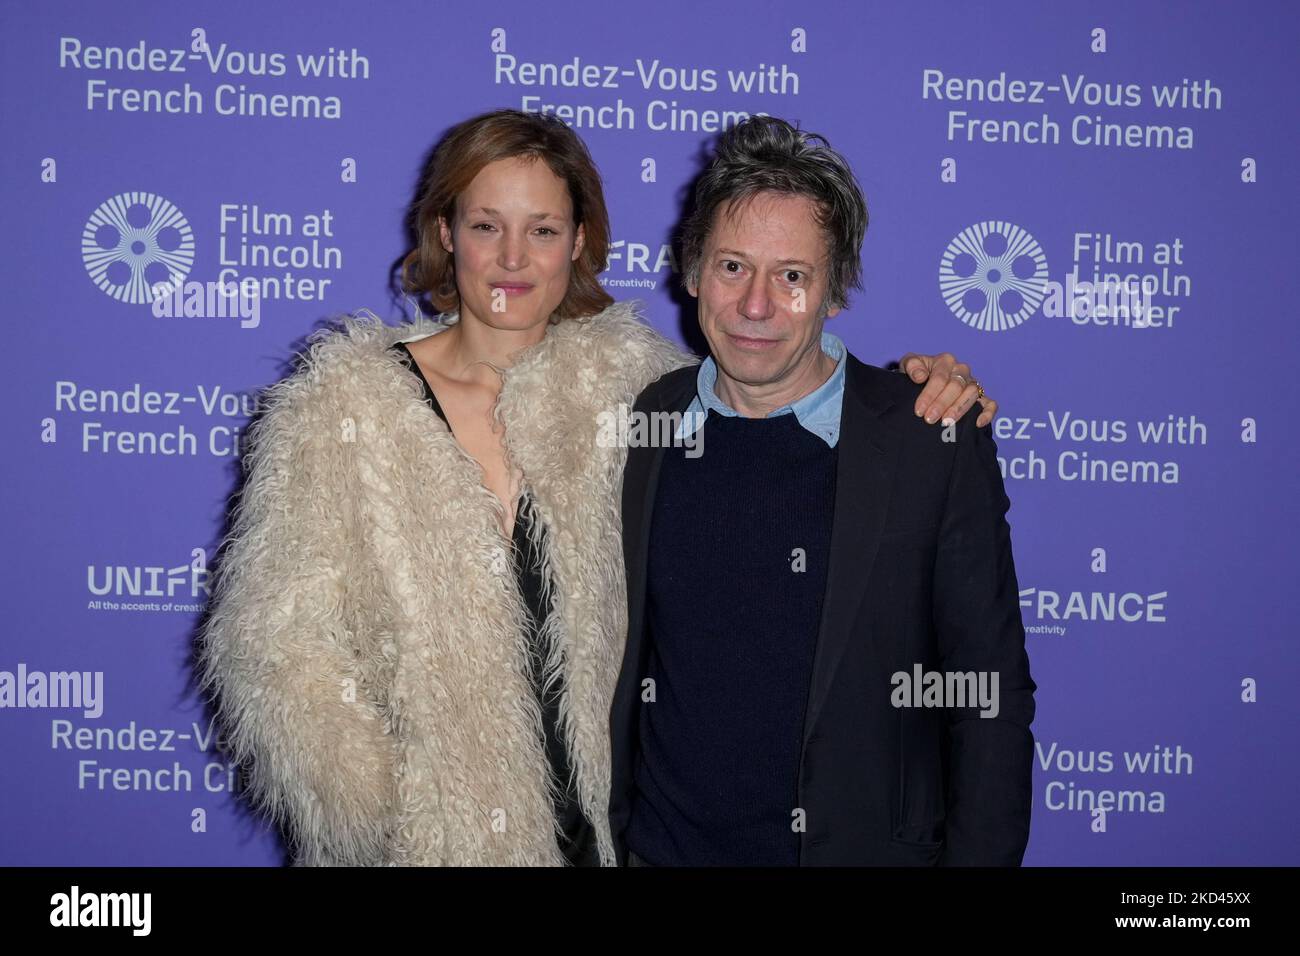 Rendez-Vous with French Cinema at Lincoln Center 2012 - Page 2